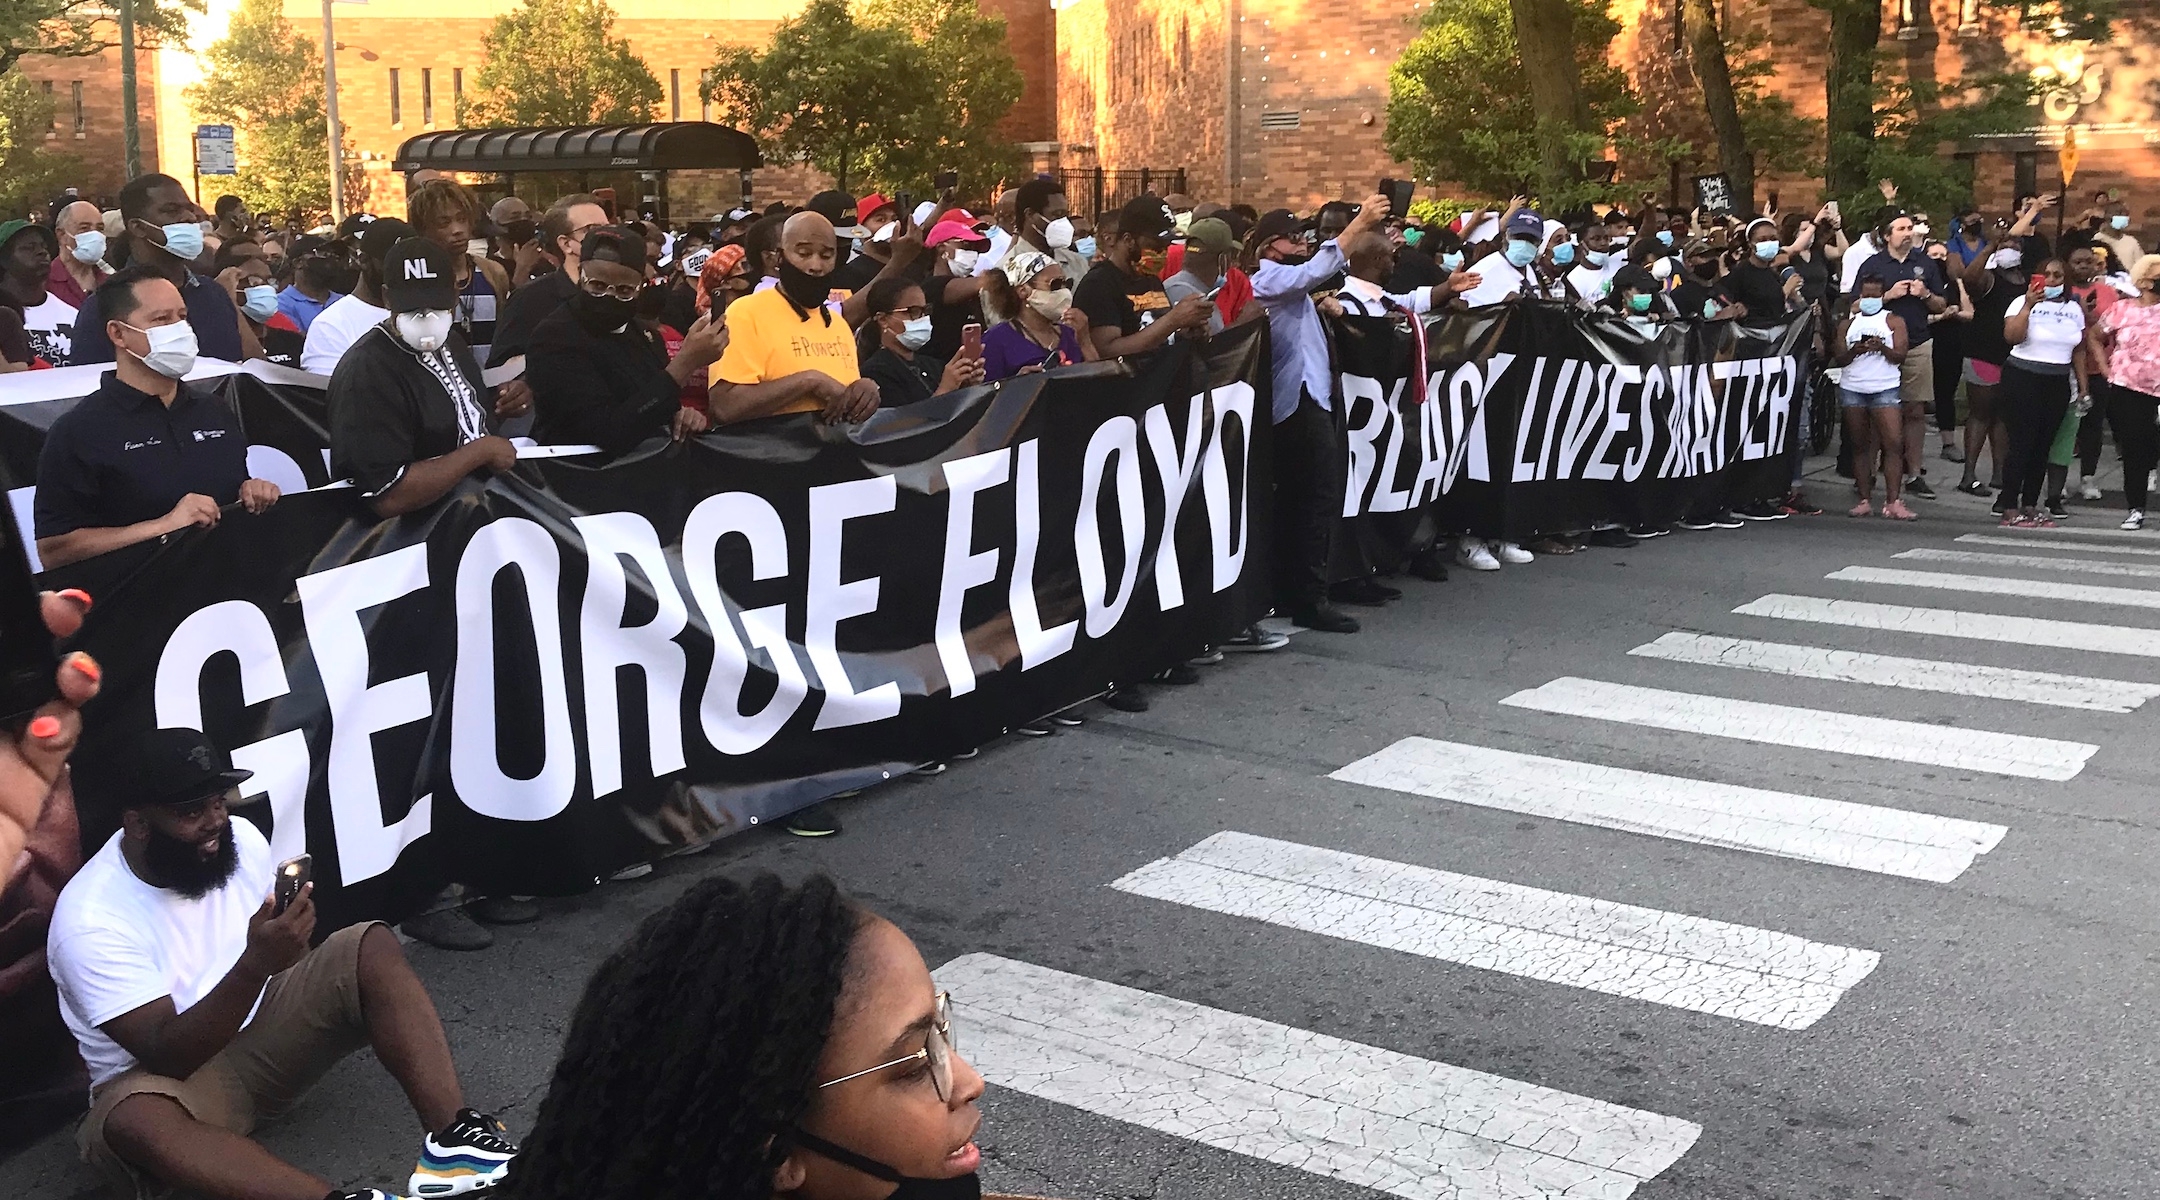 Marchers at the front of the interfaith demonstration in memory of George Floyd and protesting systemic racism in Chicago on June 2, 2020. (Courtesy of Ari Hart)